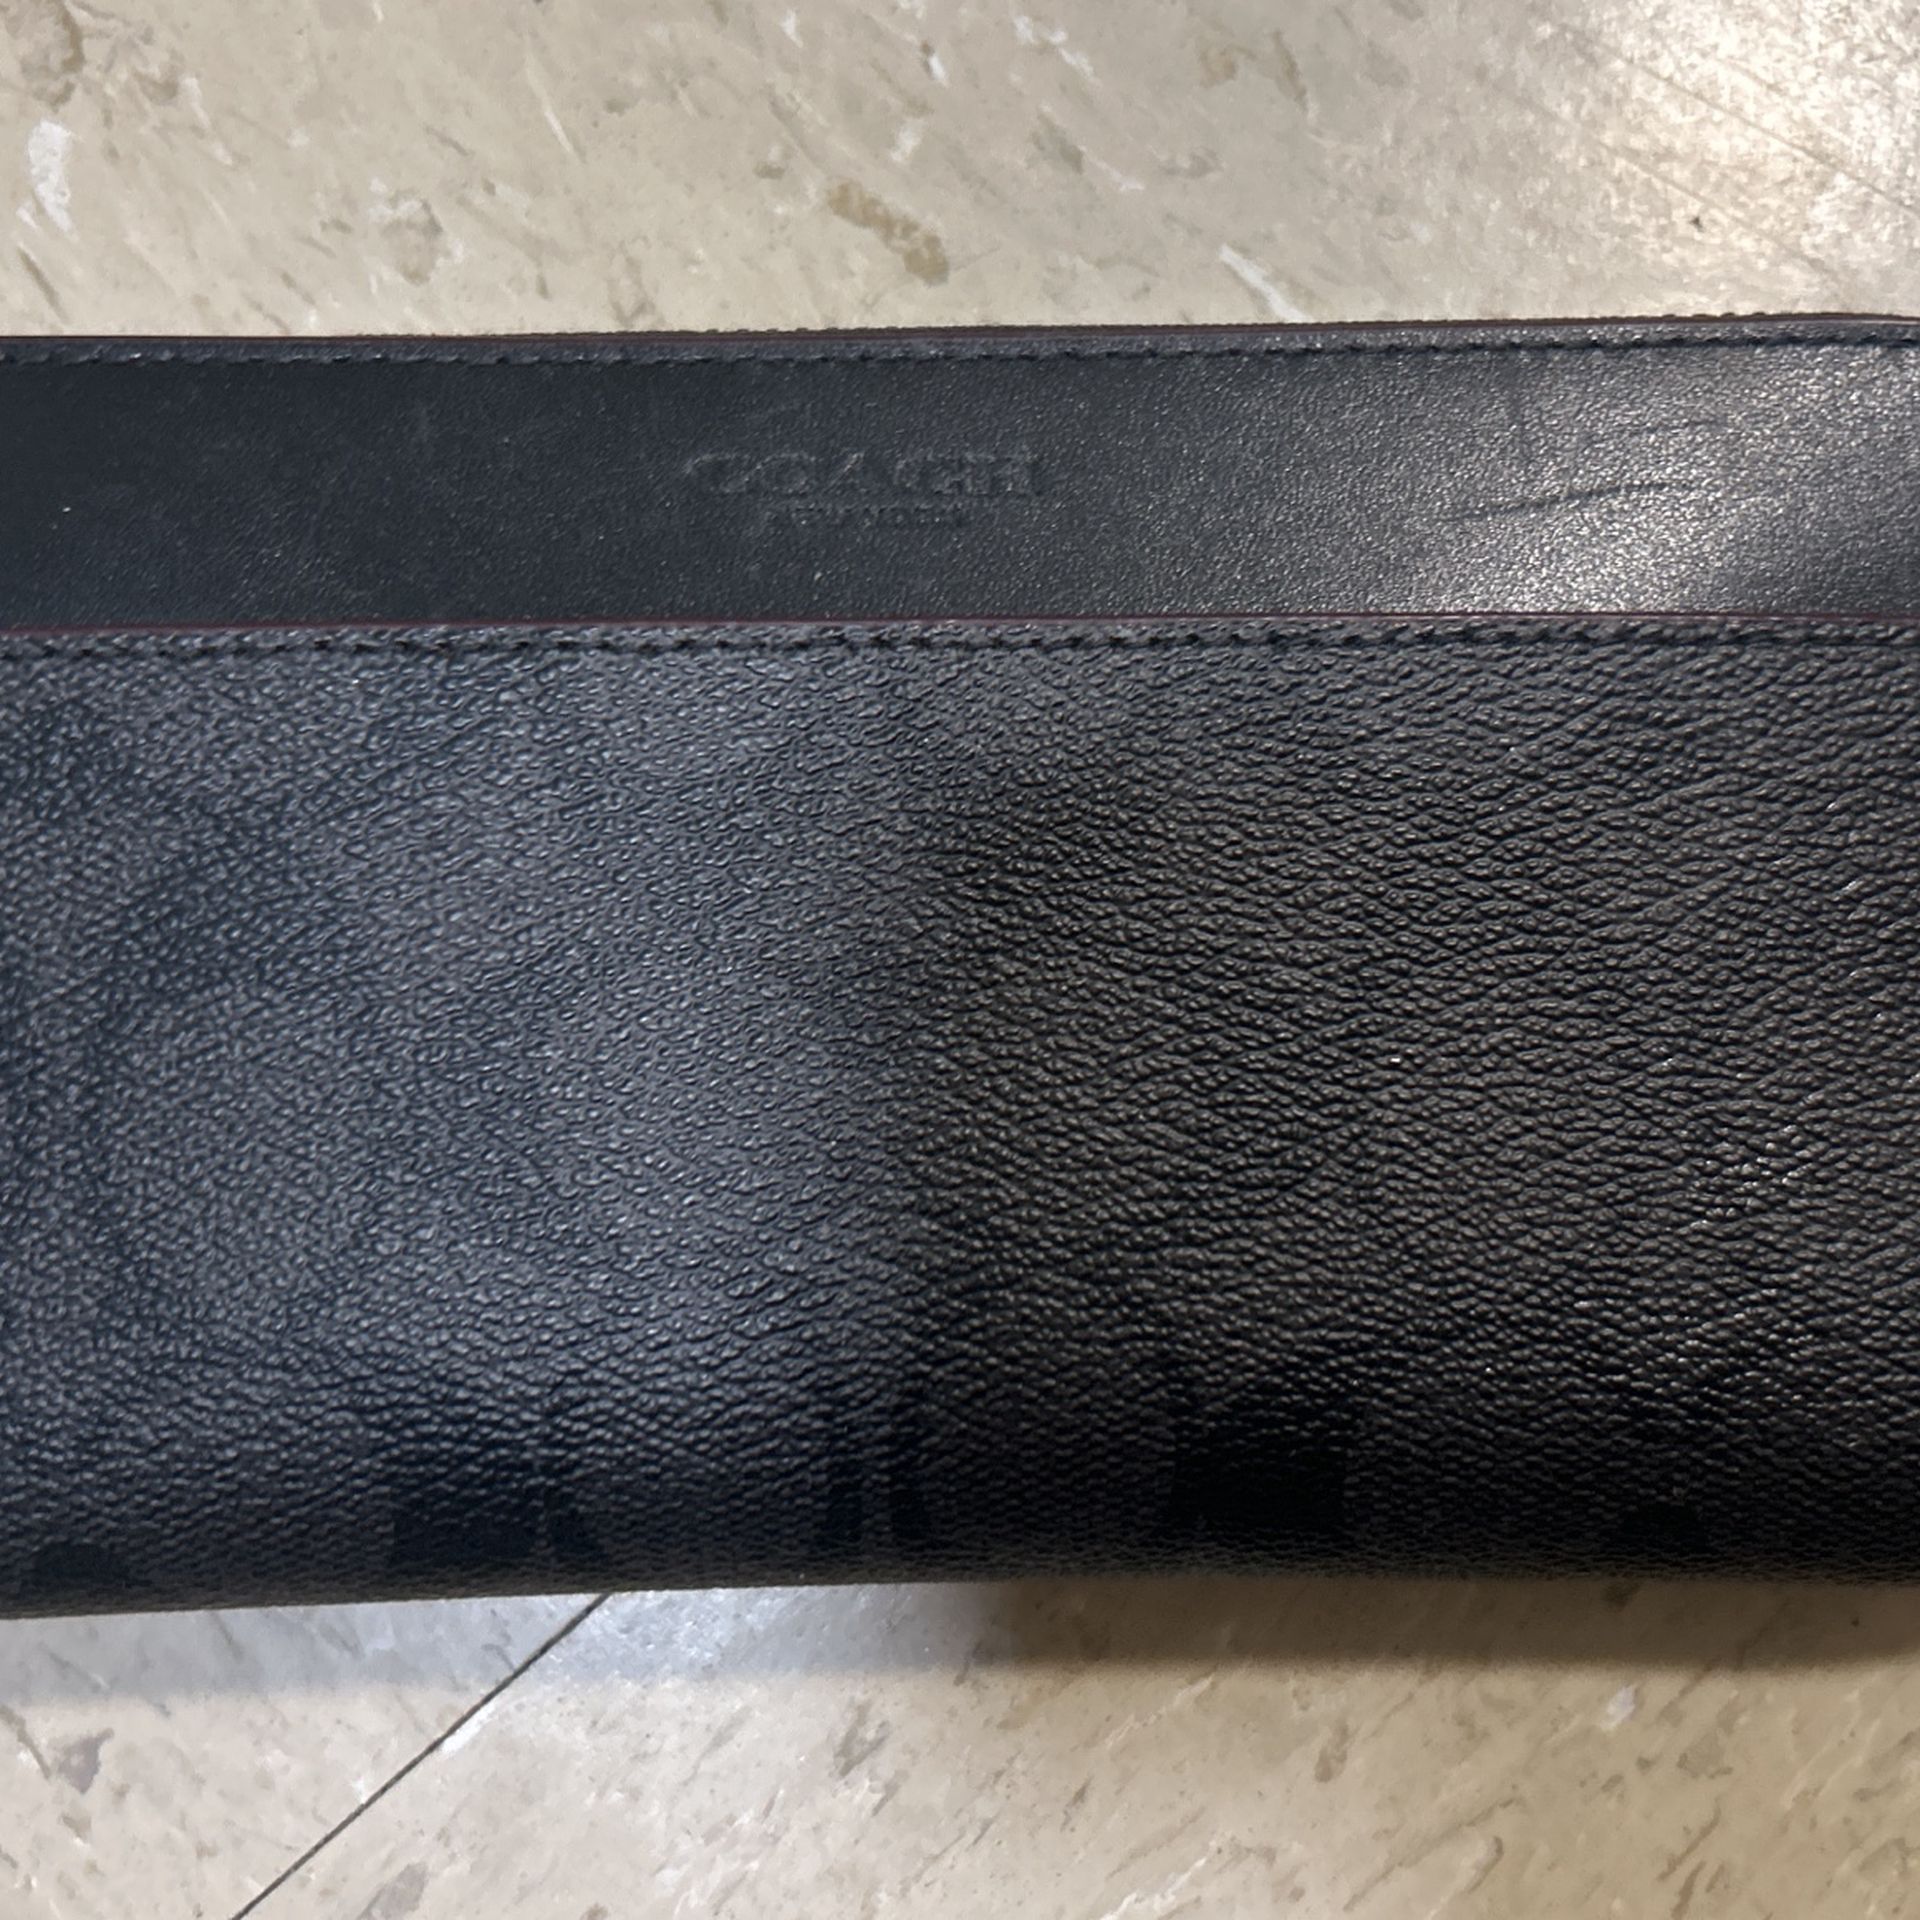 Black Coach Wallet Almost Brand New 